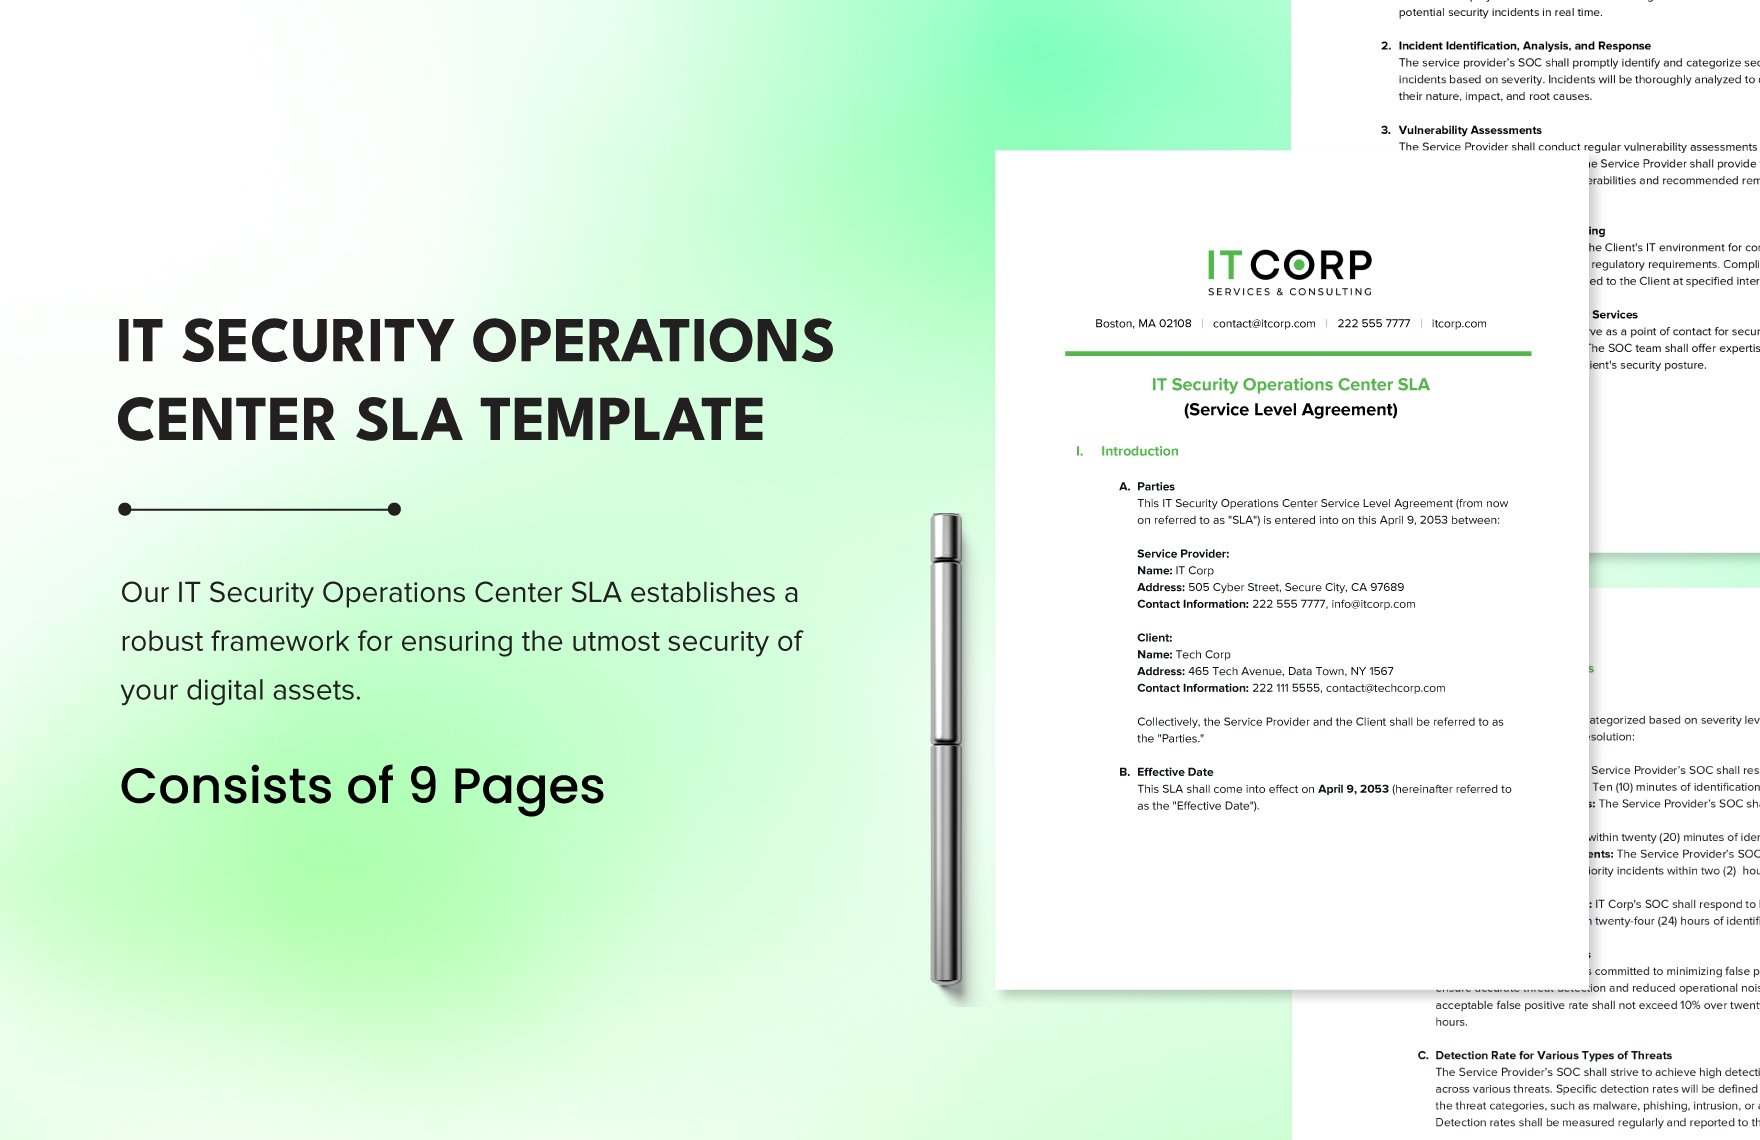 IT Security Operations Center SLA (Service Level Agreement) Template